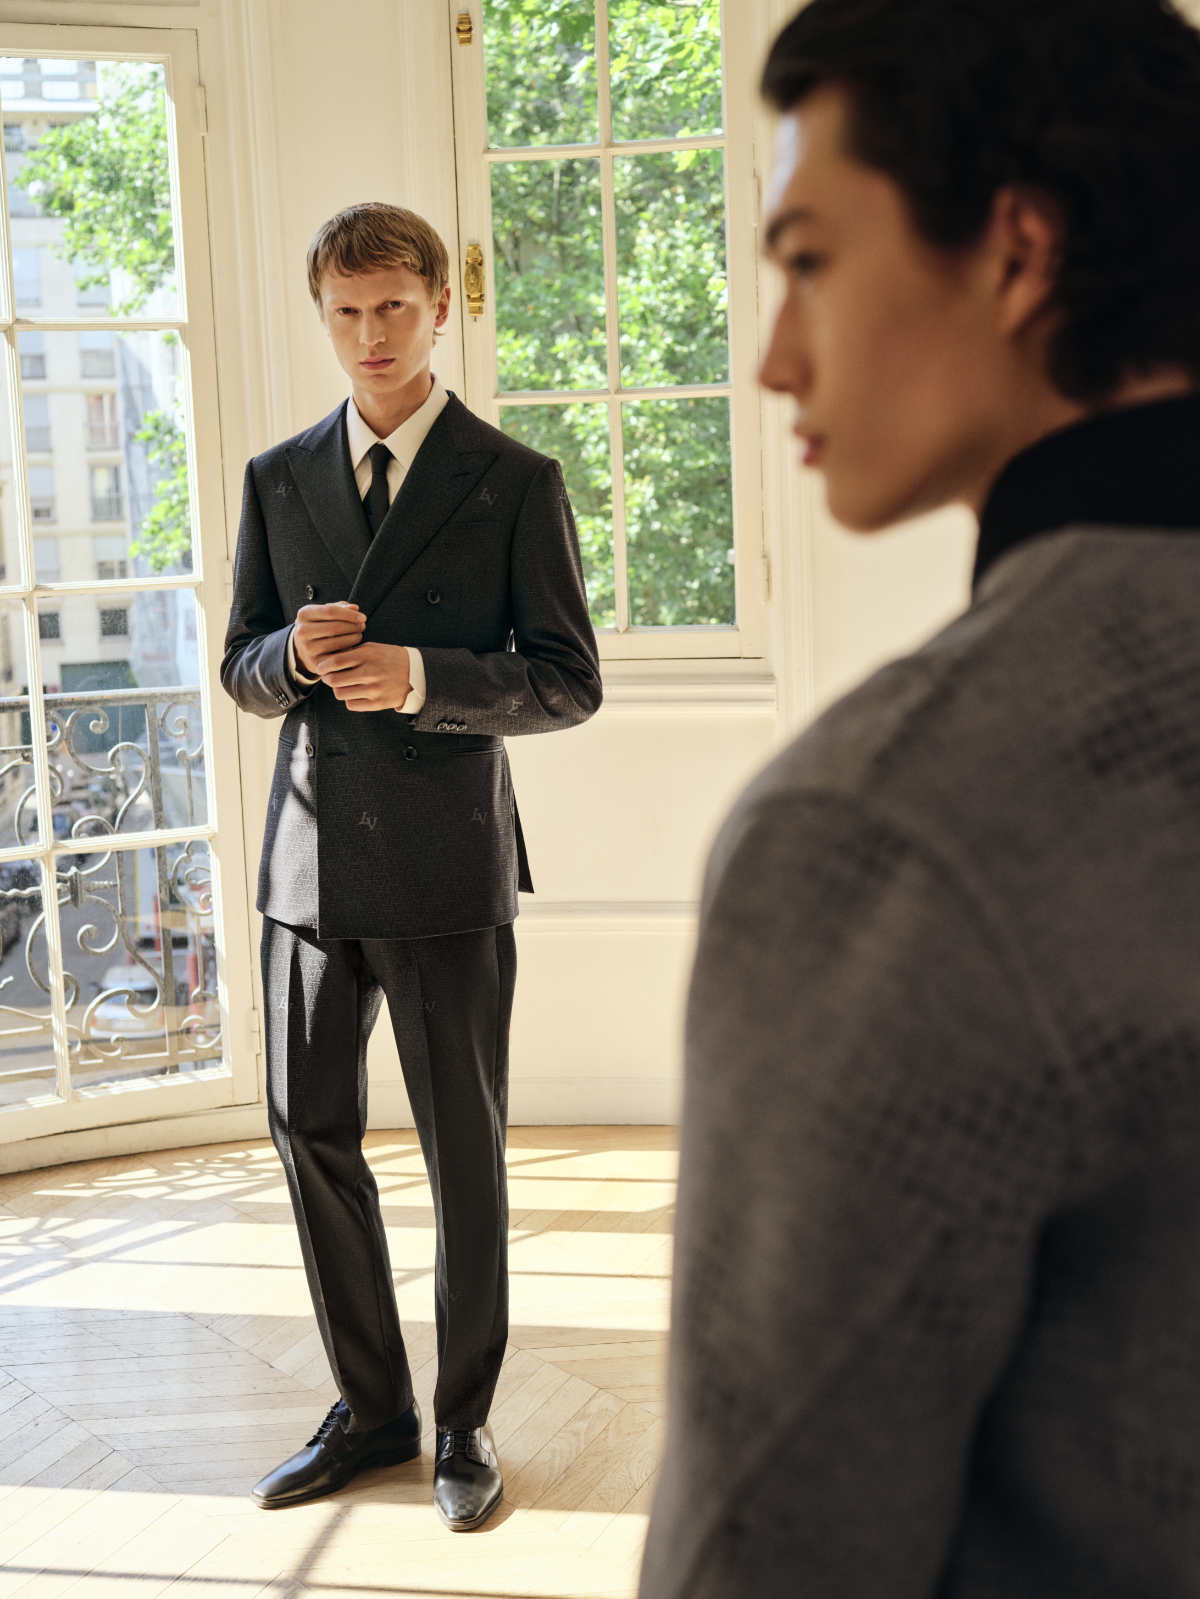 Louis Vuitton Introduces The Second Act Of Its “New Formal” Menswear Collection